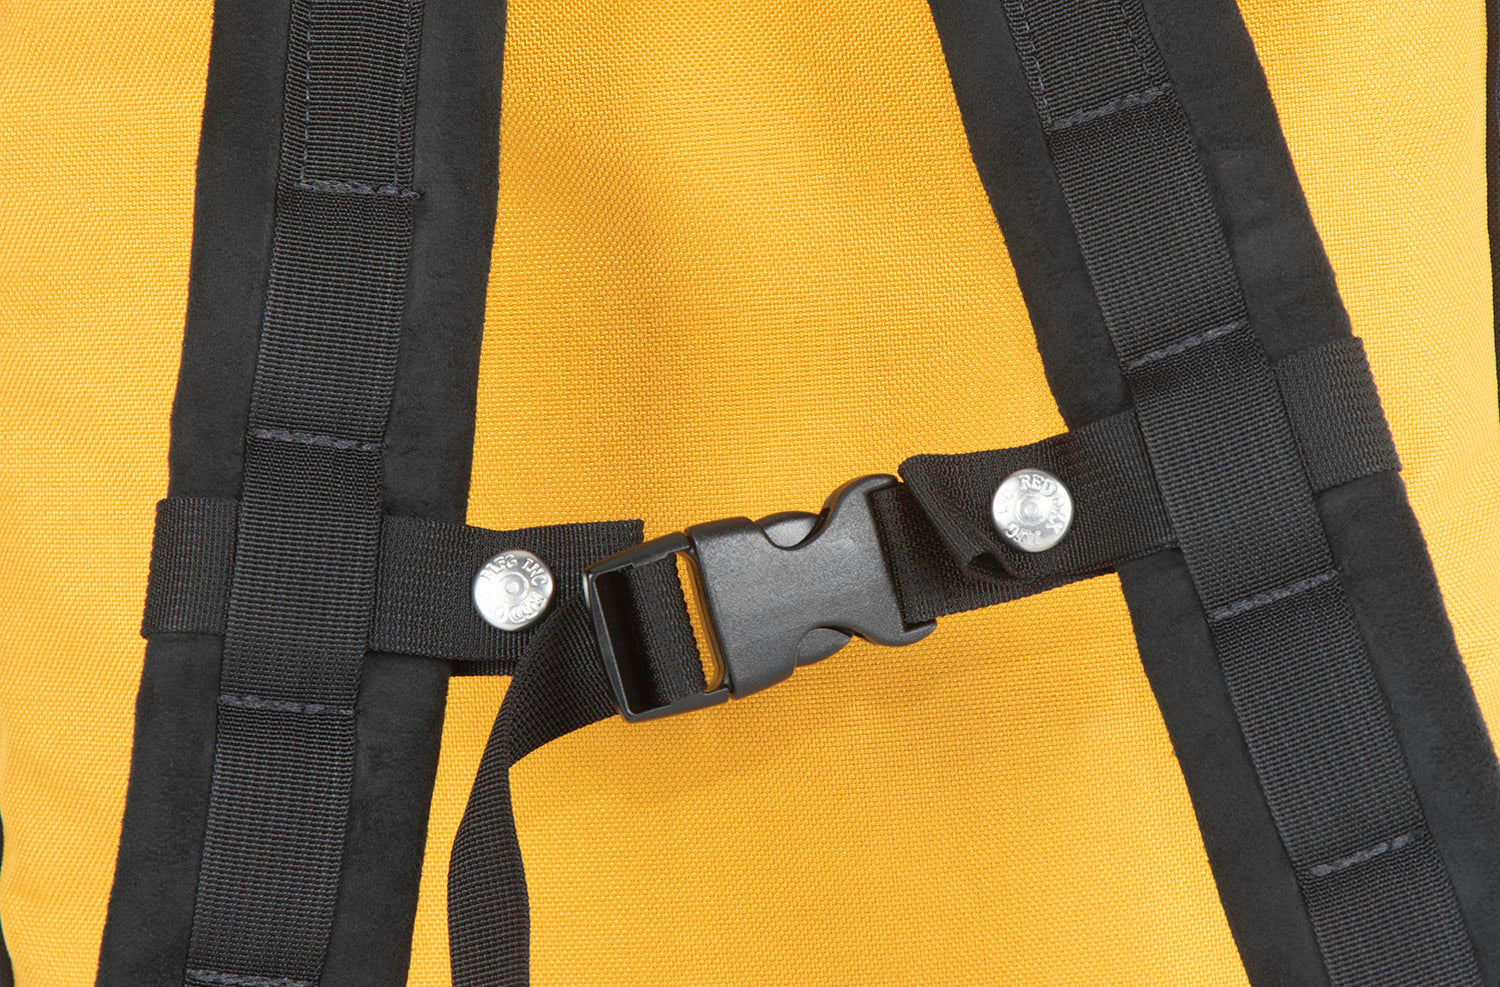 Chest strap is adjustable. 